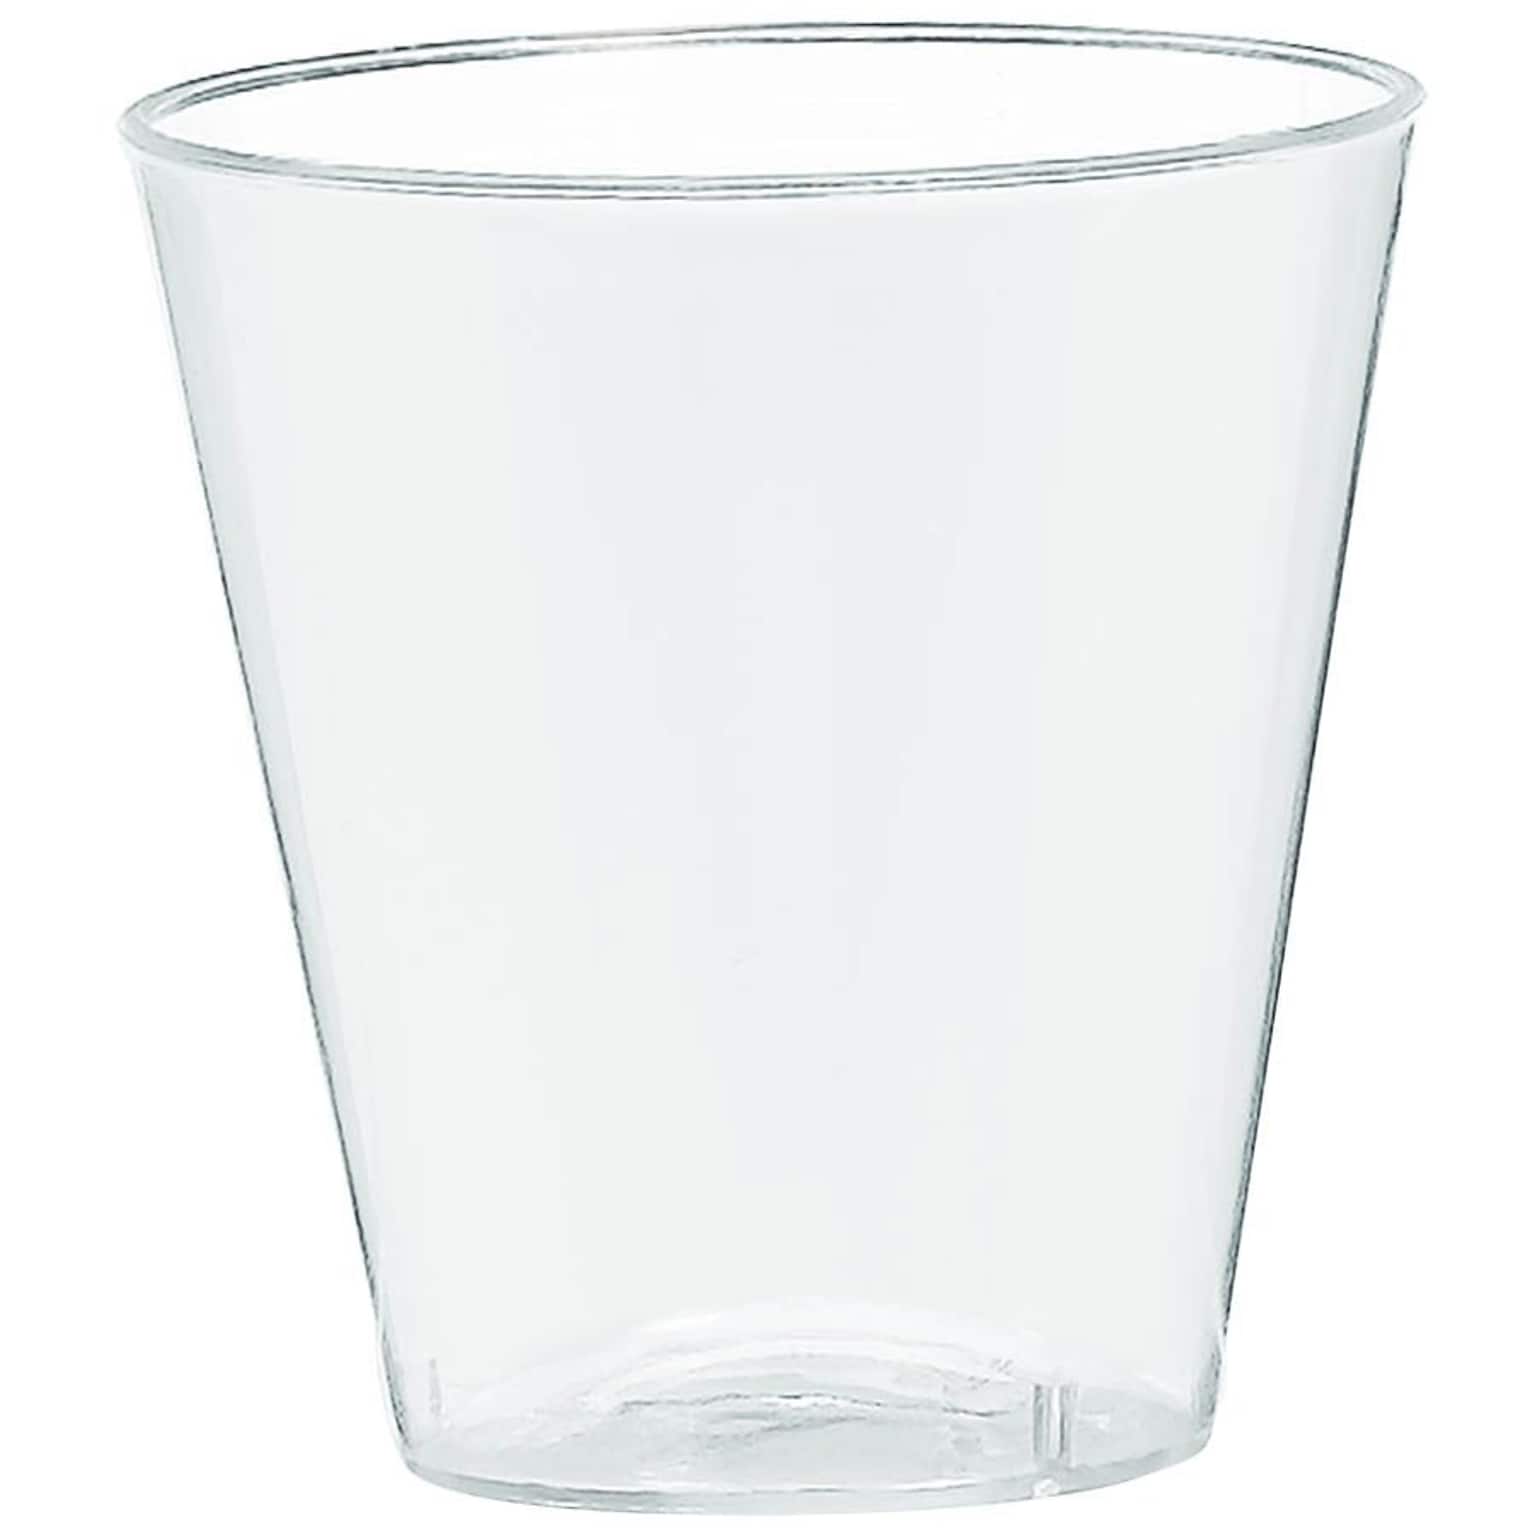 Amscan Big Party Pack Plastic Shot Glasses, 2 oz., Clear, 100/Pack, 3/Pack (357918.86)